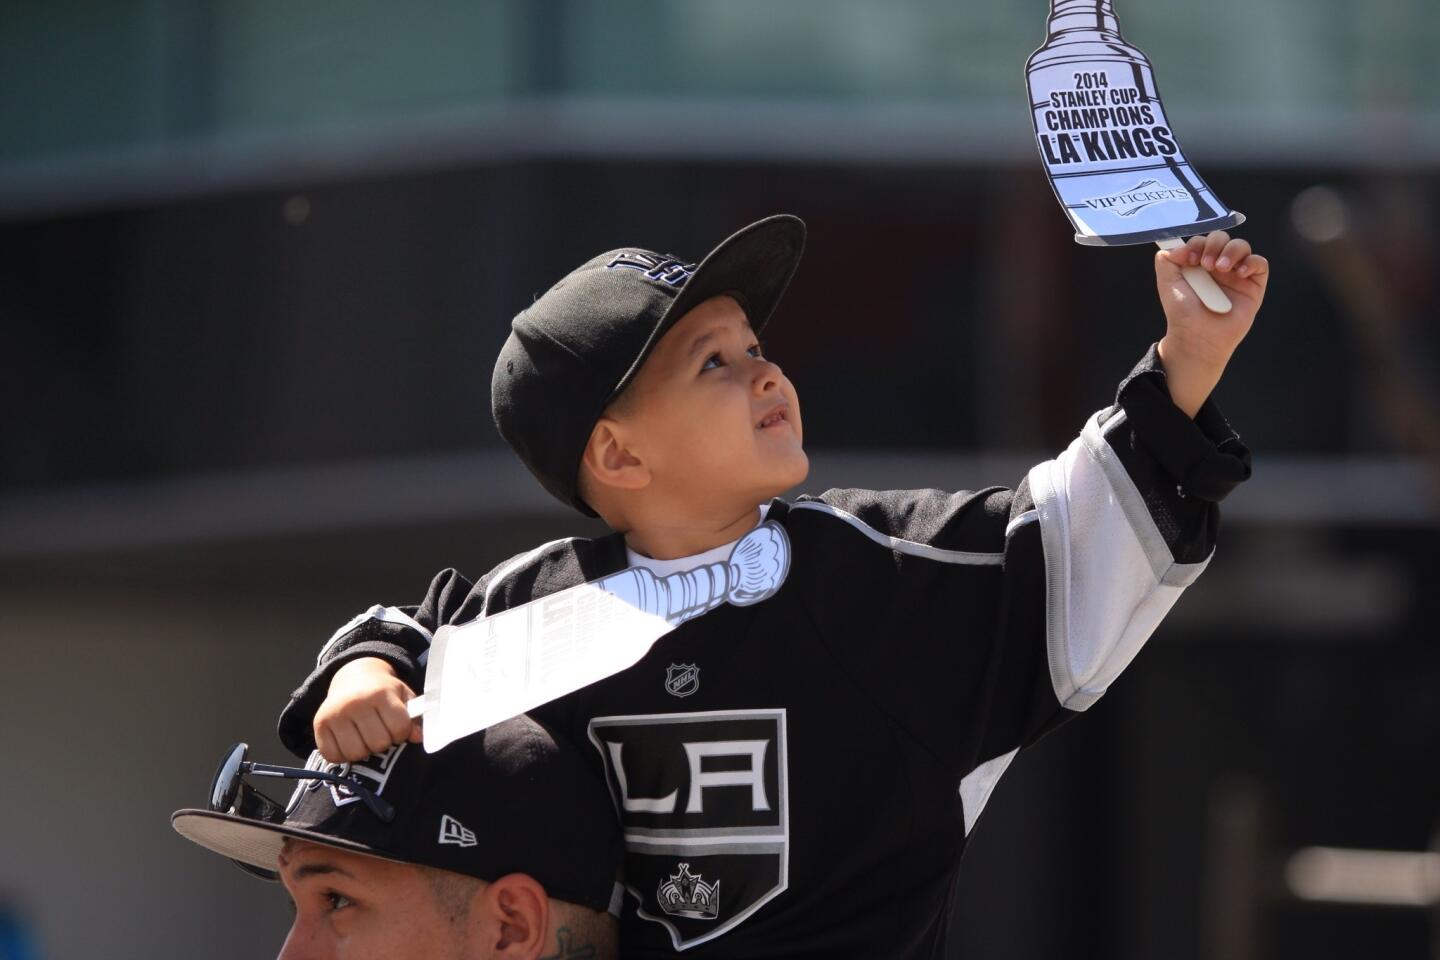 Stanley Cup victory parade: L.A. Kings fans line up early downtown